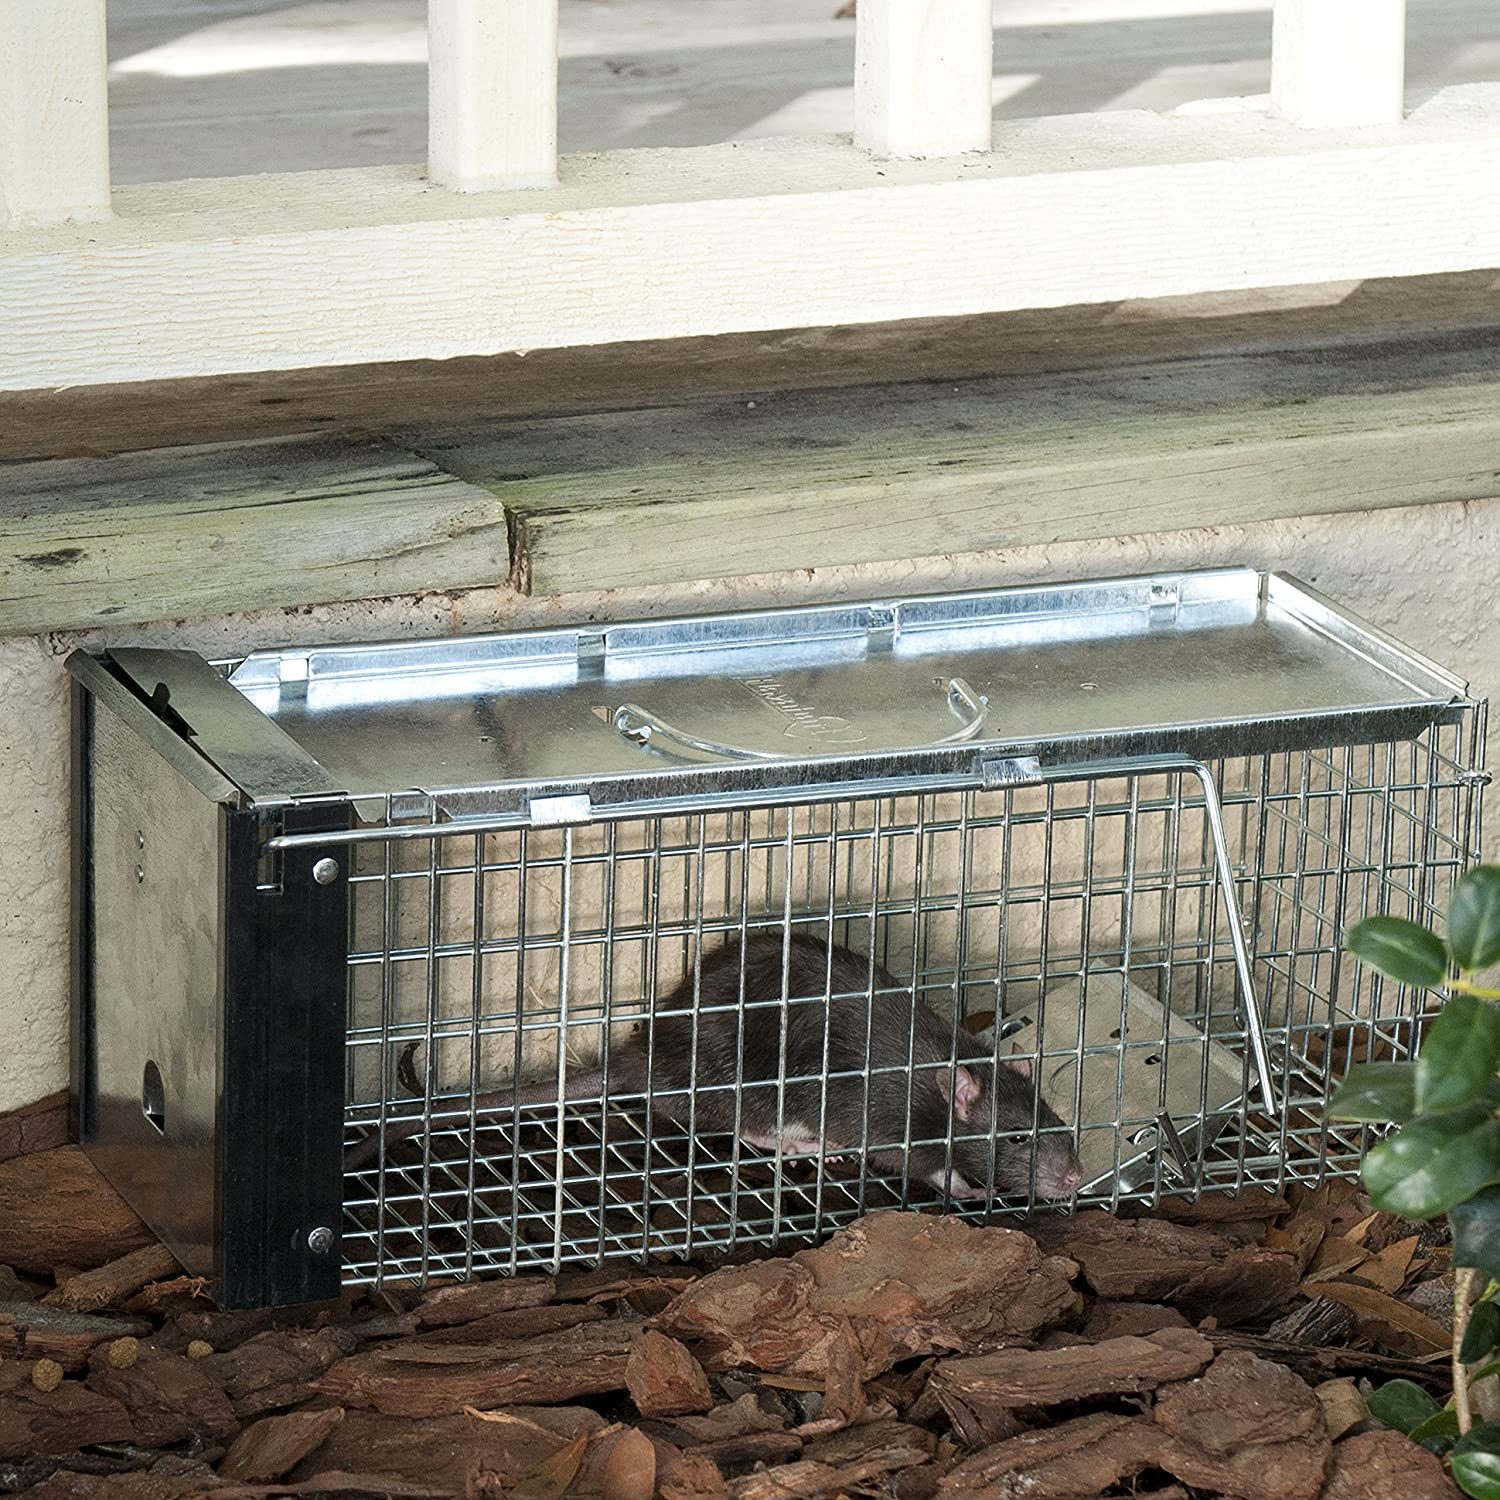 Top 5 Types of Rat Traps to Buy in 2022